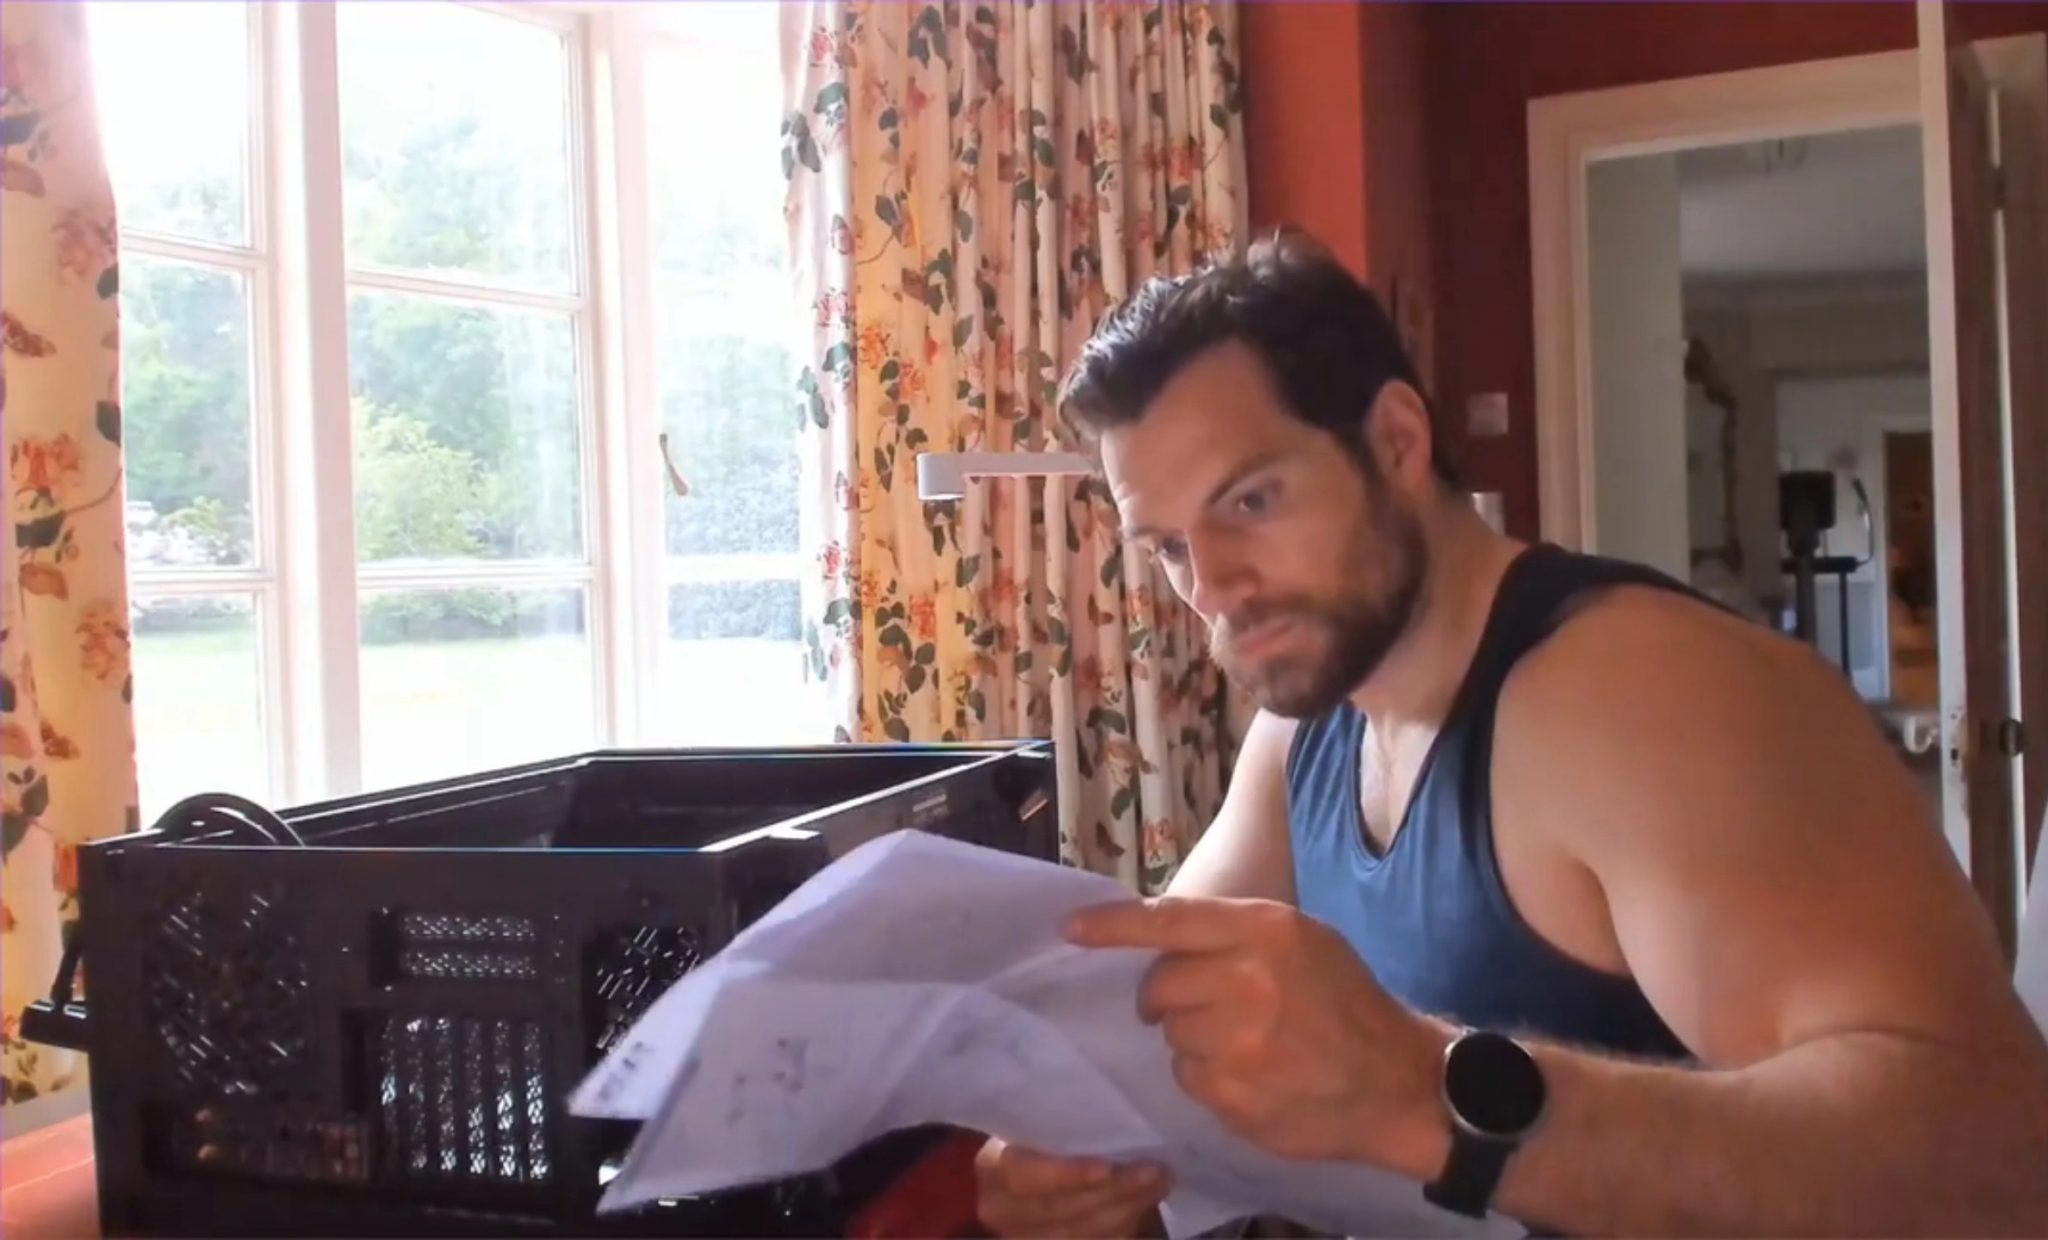 Henry Cavill Builds PC Reading Manual. 